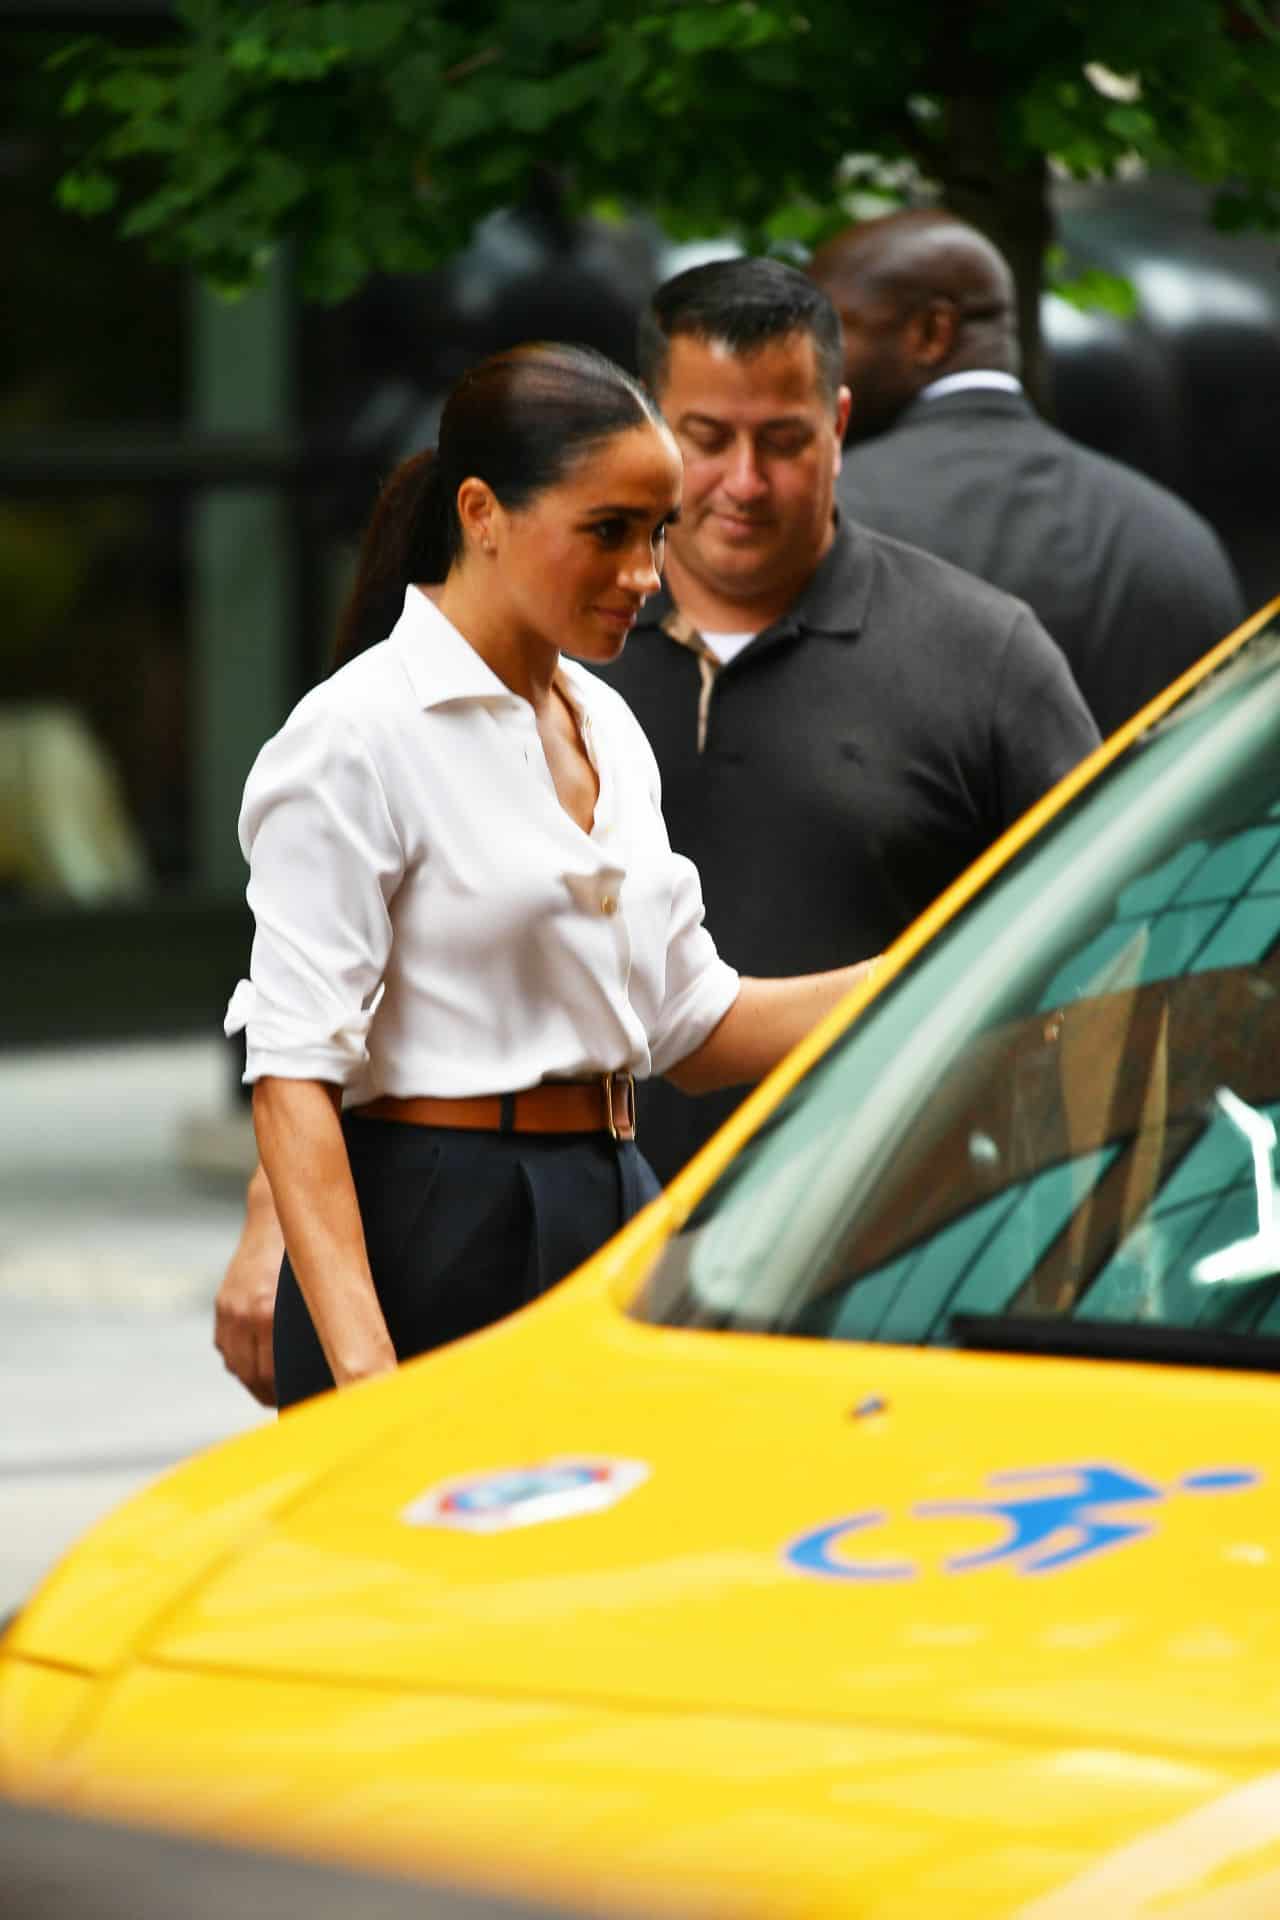 Meghan Markle Sporting a Shirt and Bermuda Shorts in the Crosby Hotel in NY